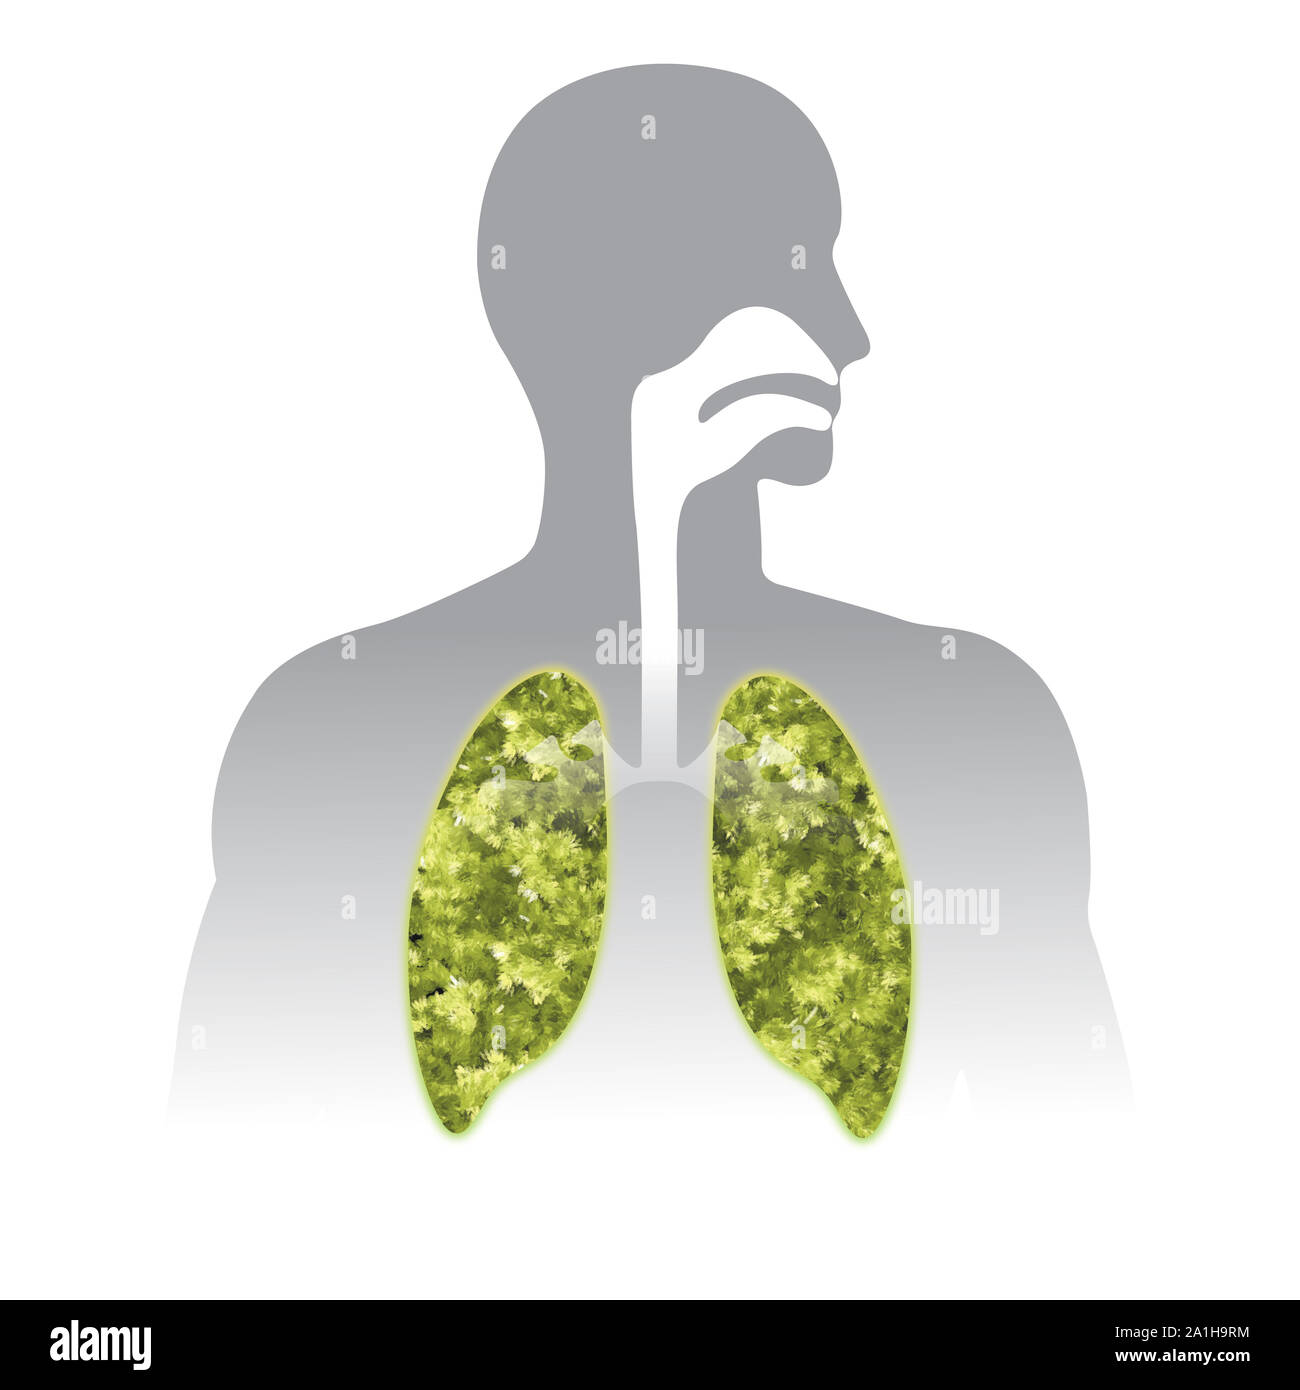 Fresh breath. Green Human lung illustration info graphic. Human body parts. Stock Photo